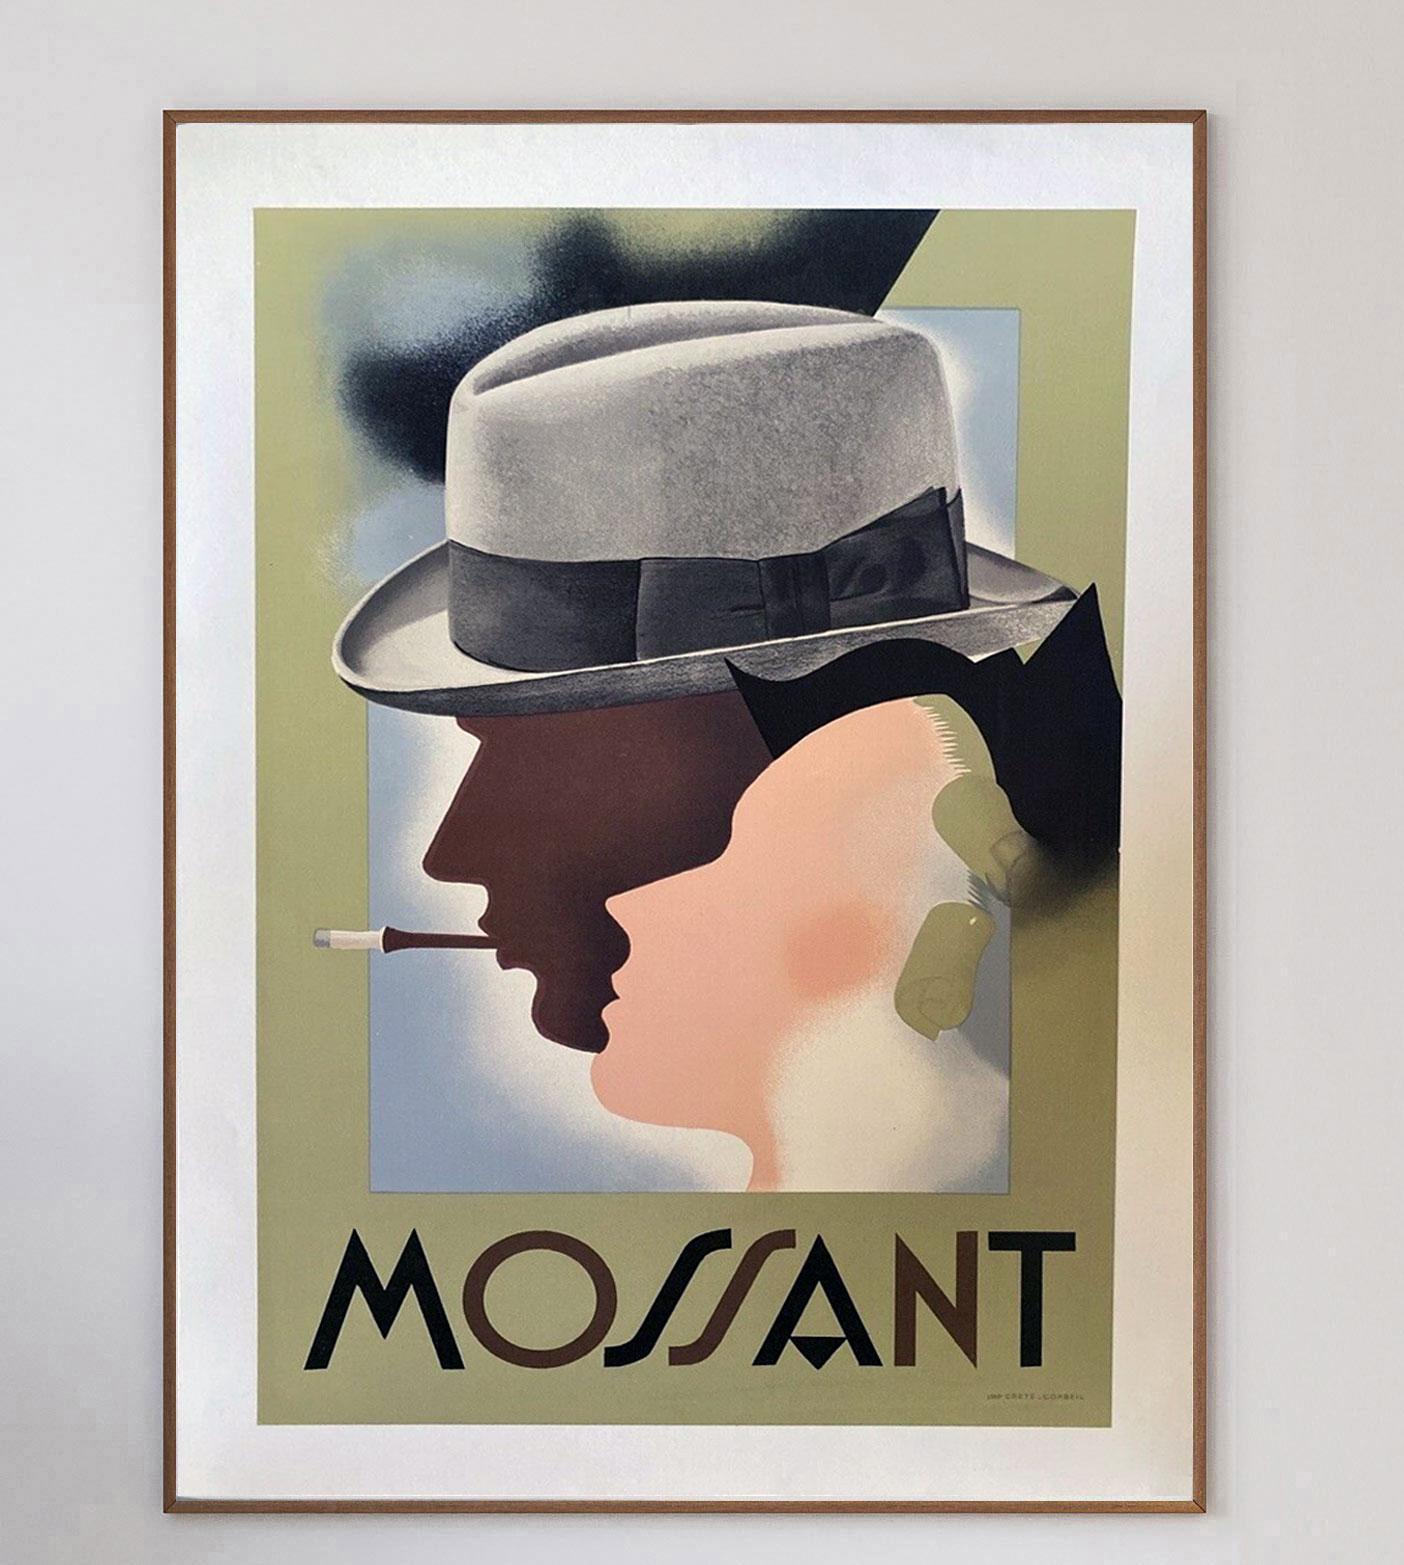 A stunning art deco poster advertising the famous French hat brand Mossant. Founded in the 19th century, Mossant became very well established in both Europe and the United States in the early to mid 20th century. This poster was designed by the